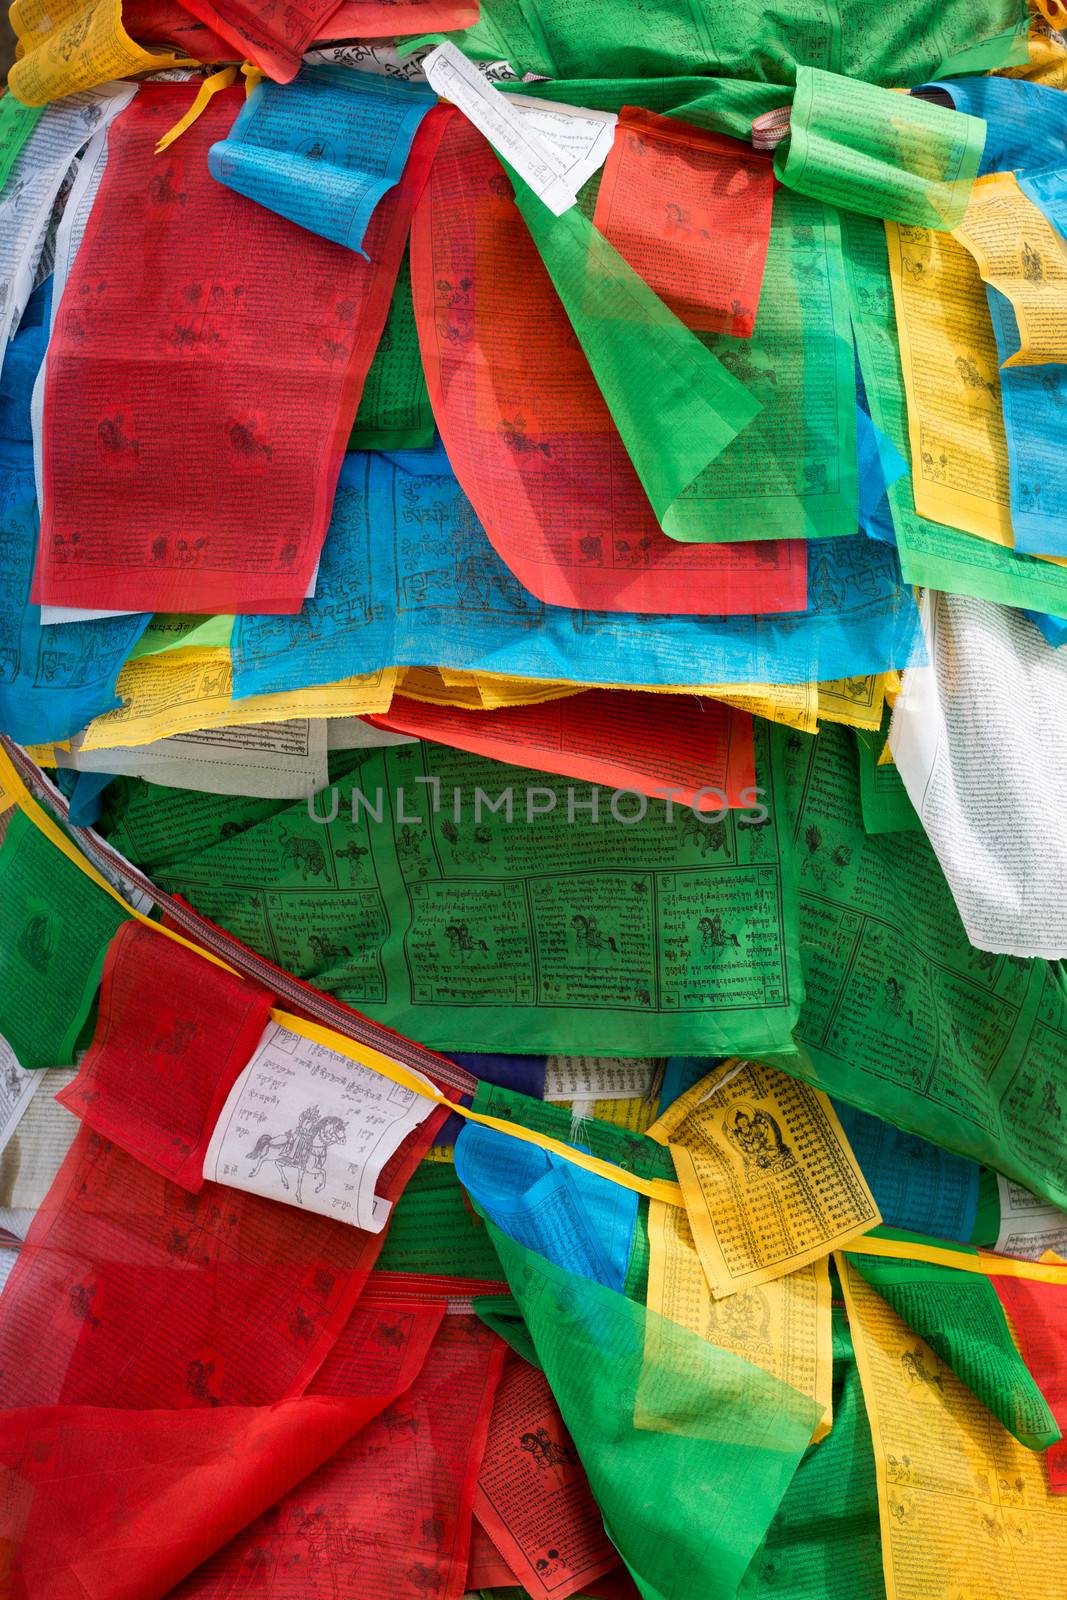 Religious boudhist flags for sale, Lhasa, China 2013